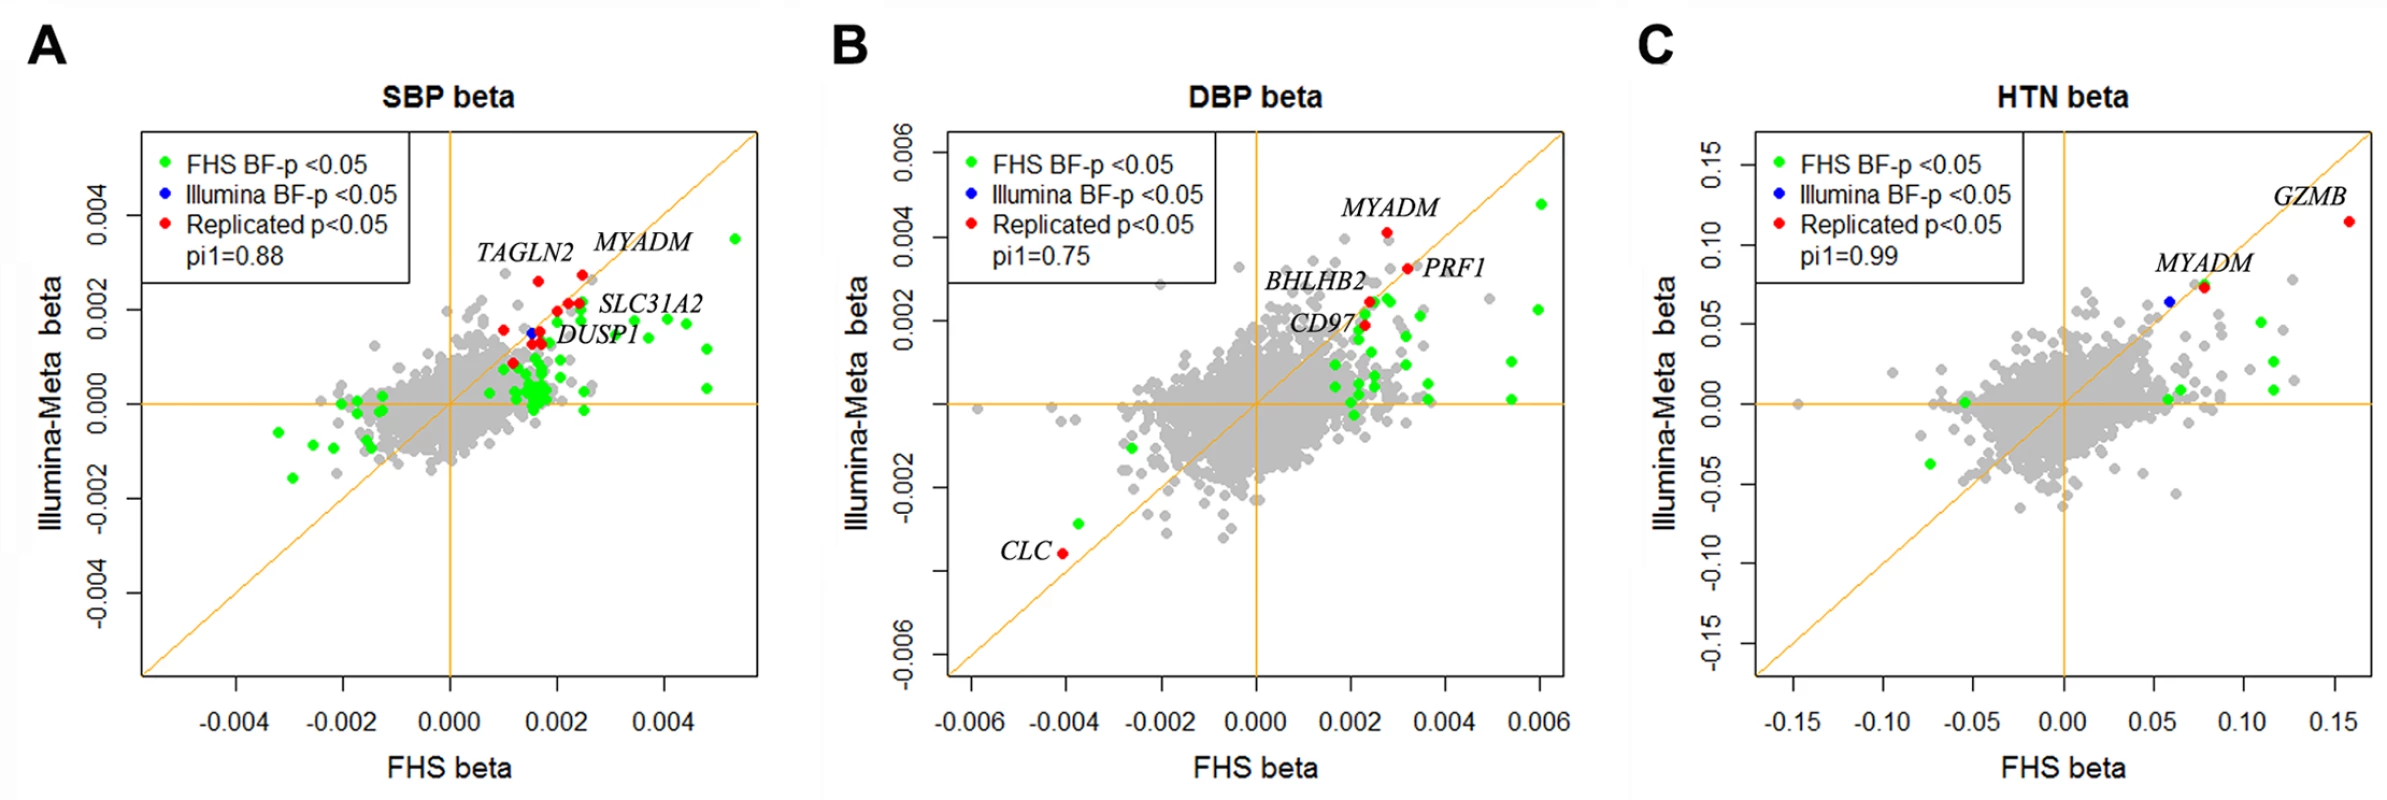 Effect size of differentially expressed BP genes in the Framingham Heart Study and the Illumina cohorts.